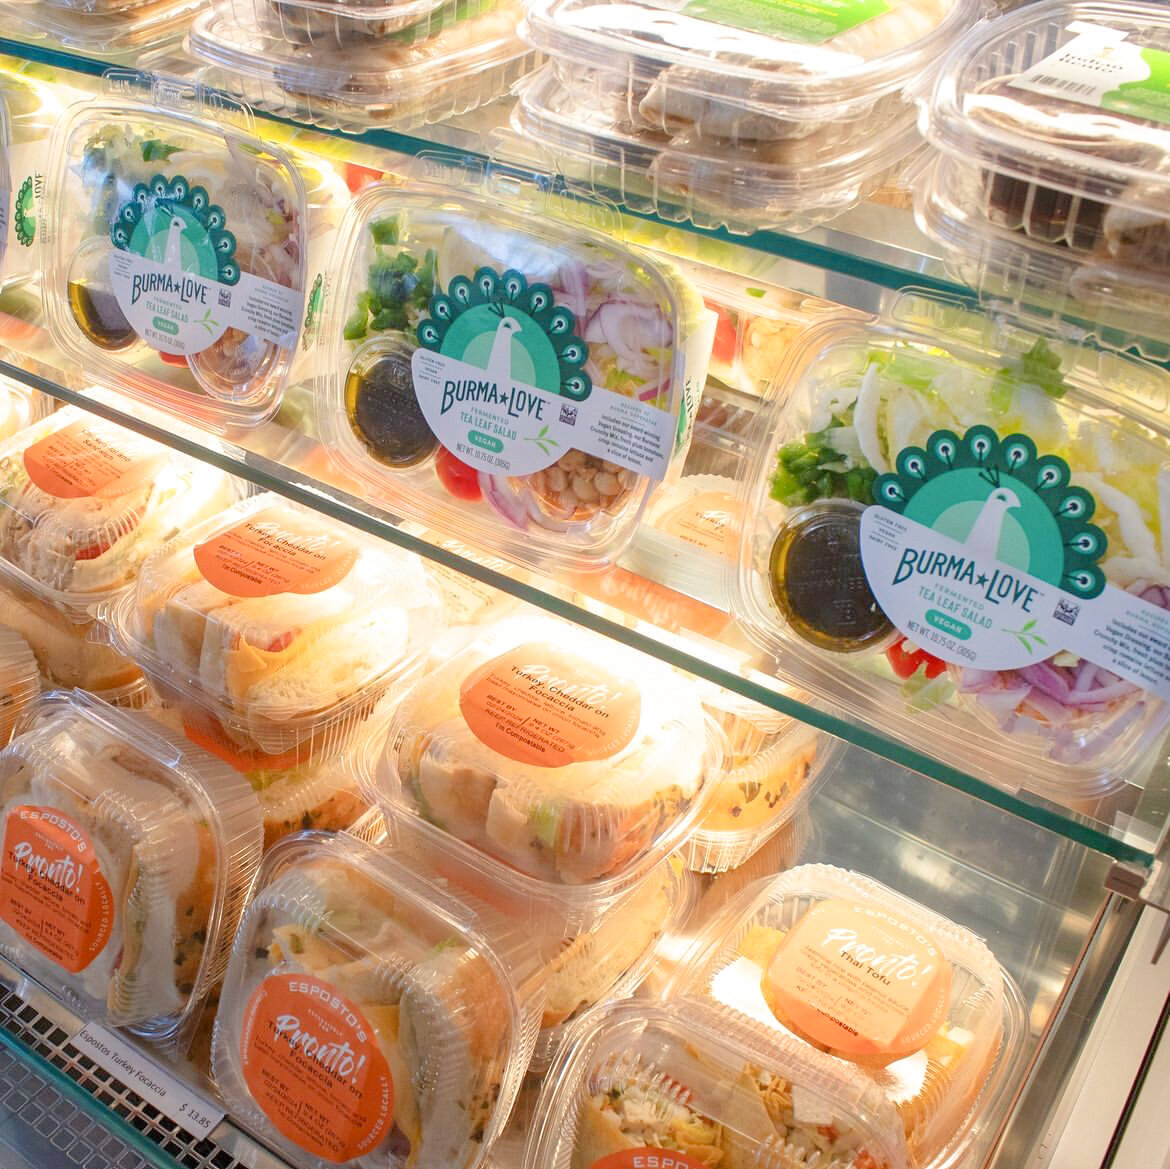 Traveling through SFO? You can pick up our ready-to-eat meals at Pronto Provisions in T3E. Freshly packed and filled with flavor, this is an airport meal that will have you feeling as fueled as your plane.

#burmalovefoods #burmalove #burmasuperstar 